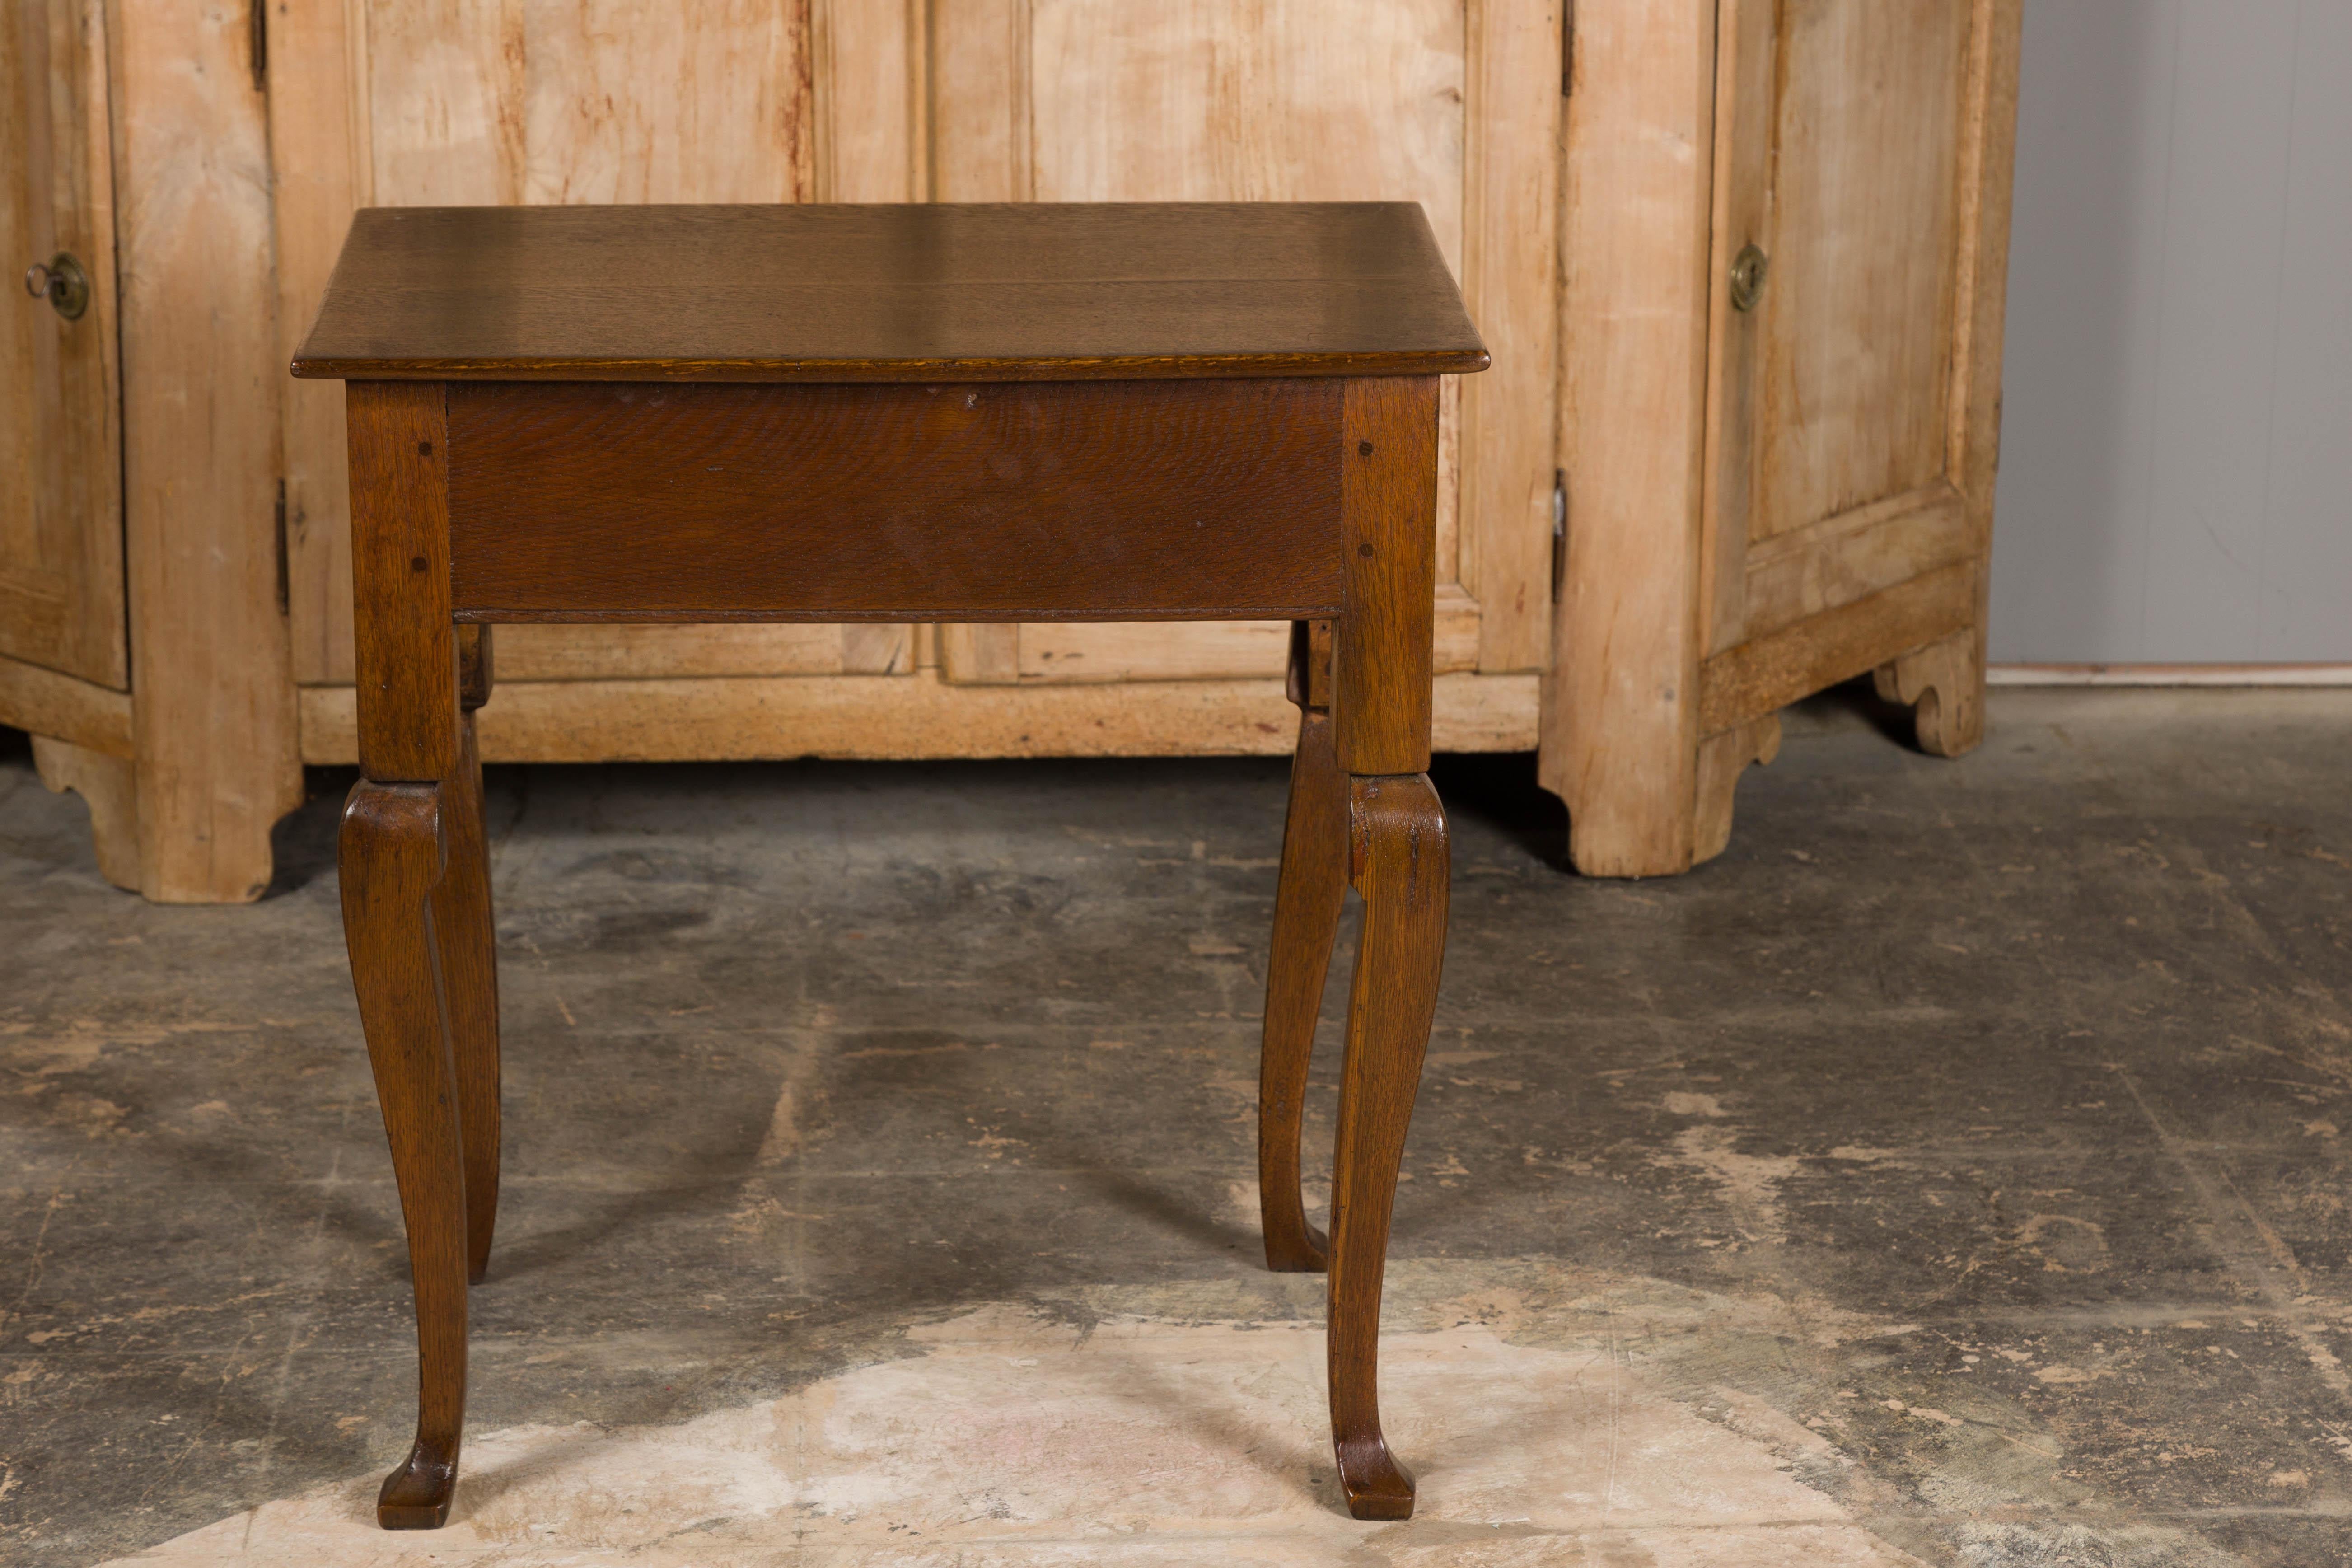 English Georgian 19th Century Oak Table with Three Drawers and Cabriole Legs For Sale 14